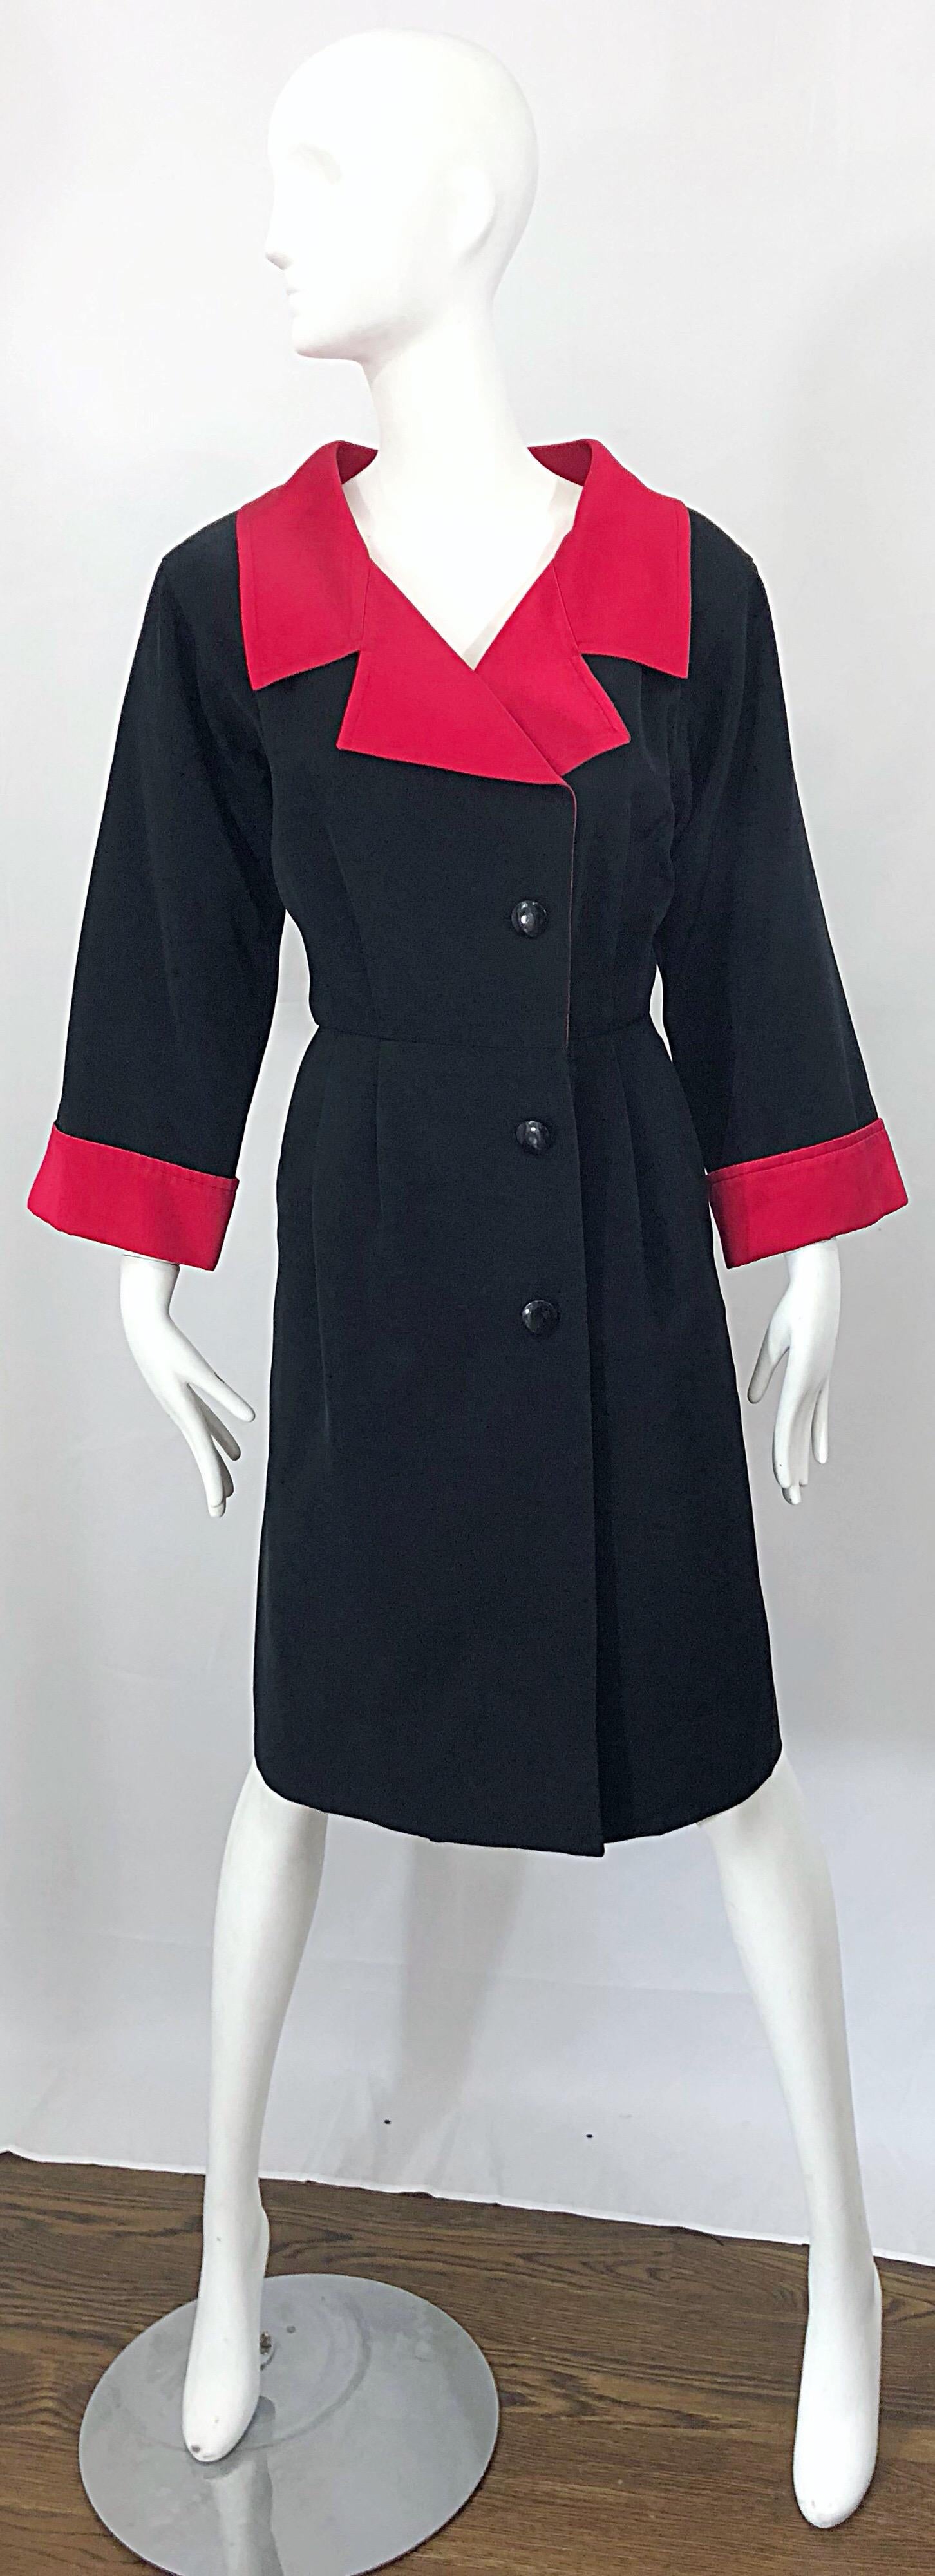 Chic vintage Yves Saint Laurent Rive Gauche black and red silk dress! Classic YSL silhouette that really flatters the body. Buttons up the front with interior hook-and-eye closures and hidden snap at left lapel. Lipstick red silk satin collar and